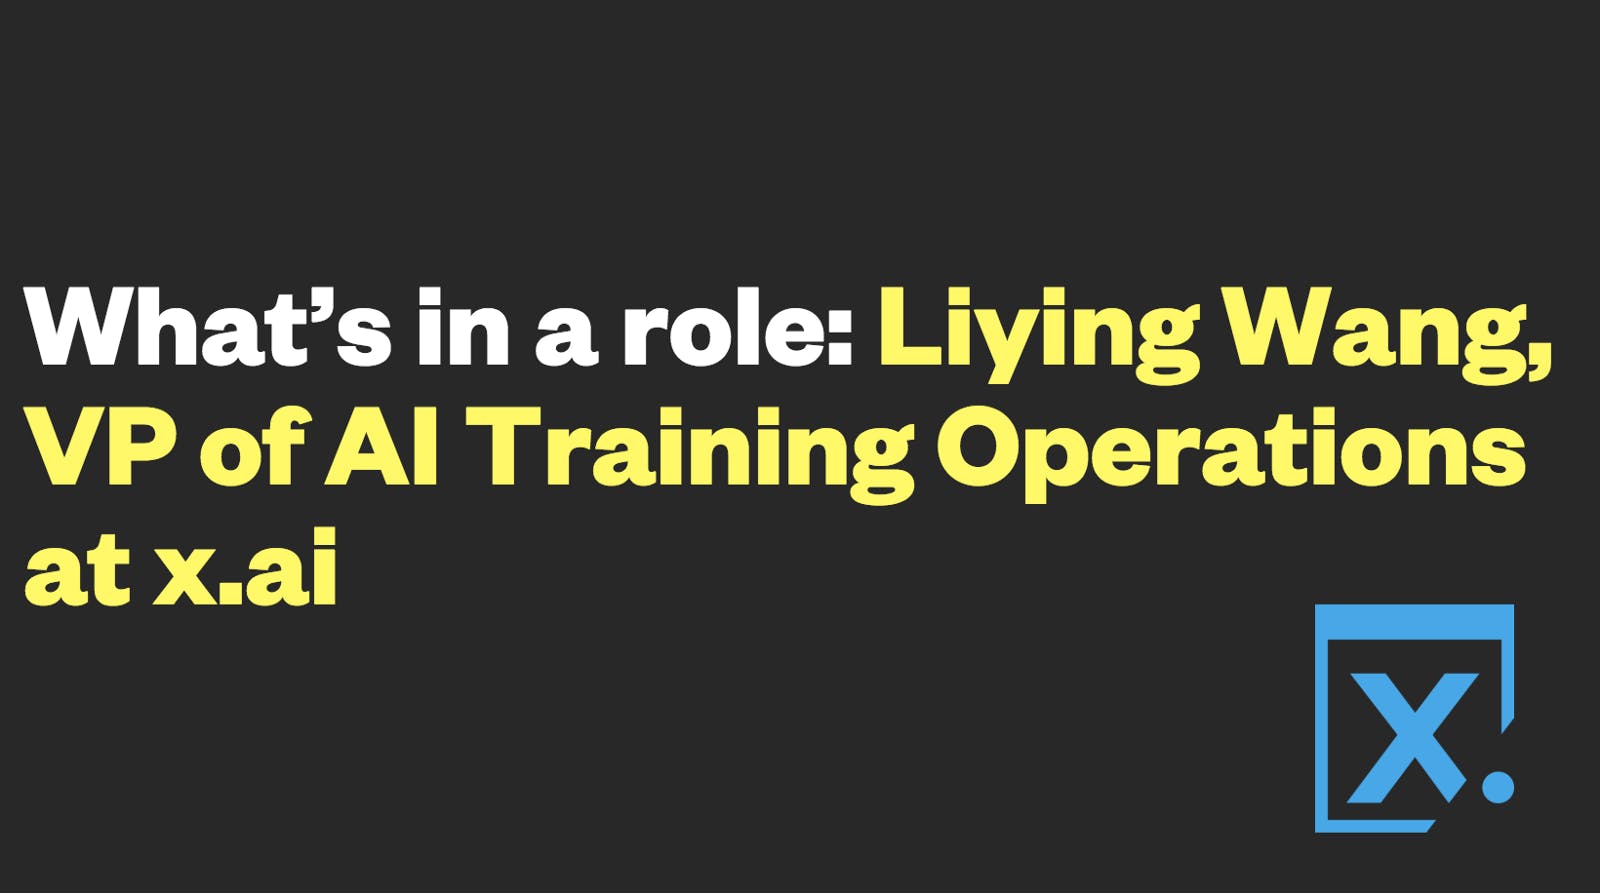 /whats-in-a-role-liying-wang-vp-of-ai-training-operations-at-x-ai-c713f067b8a2 feature image